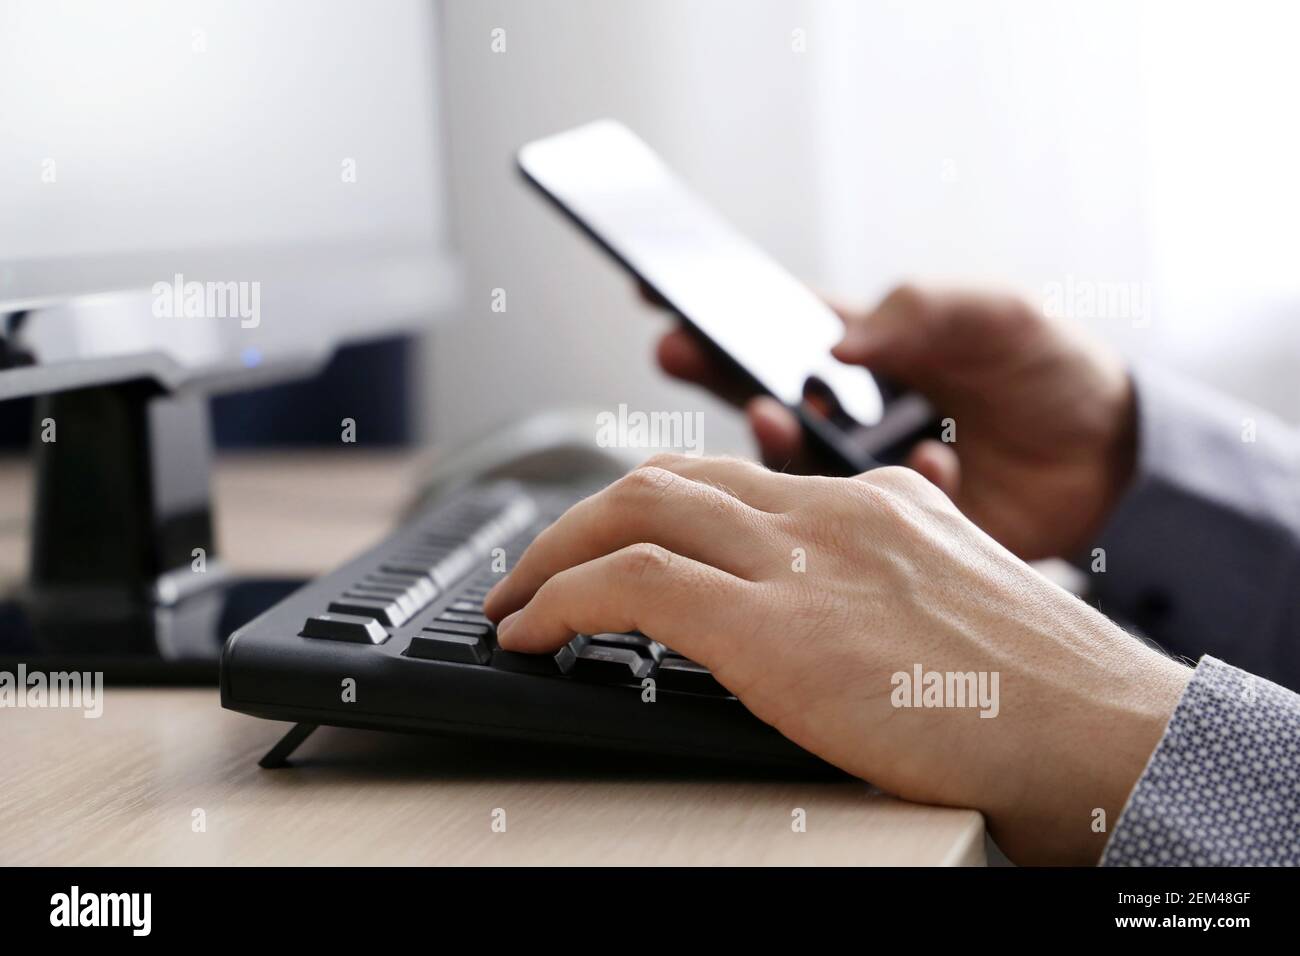 Man using smartphone on PC keyboard background. Concept of online communication, office or home work and payment Stock Photo